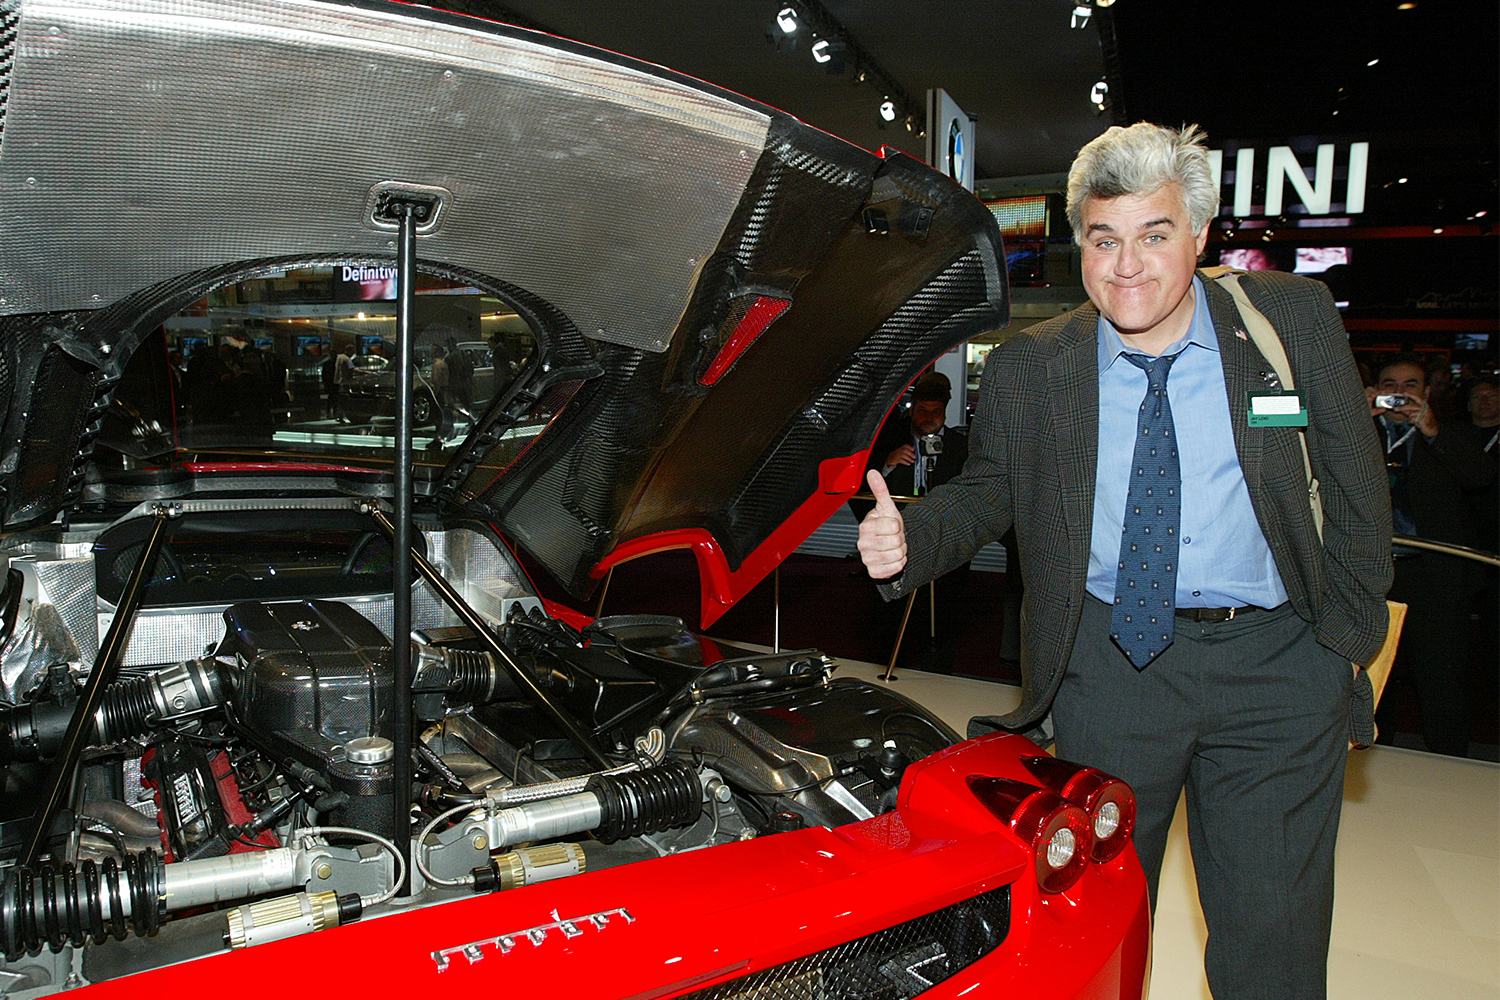 Jay Leno checks out the Ferrari Enzo engine at the North American International Auto Show in Detroit, Michigan on January 5, 2003. In 2021, Leno explained why he doesn’t own a Ferrari.